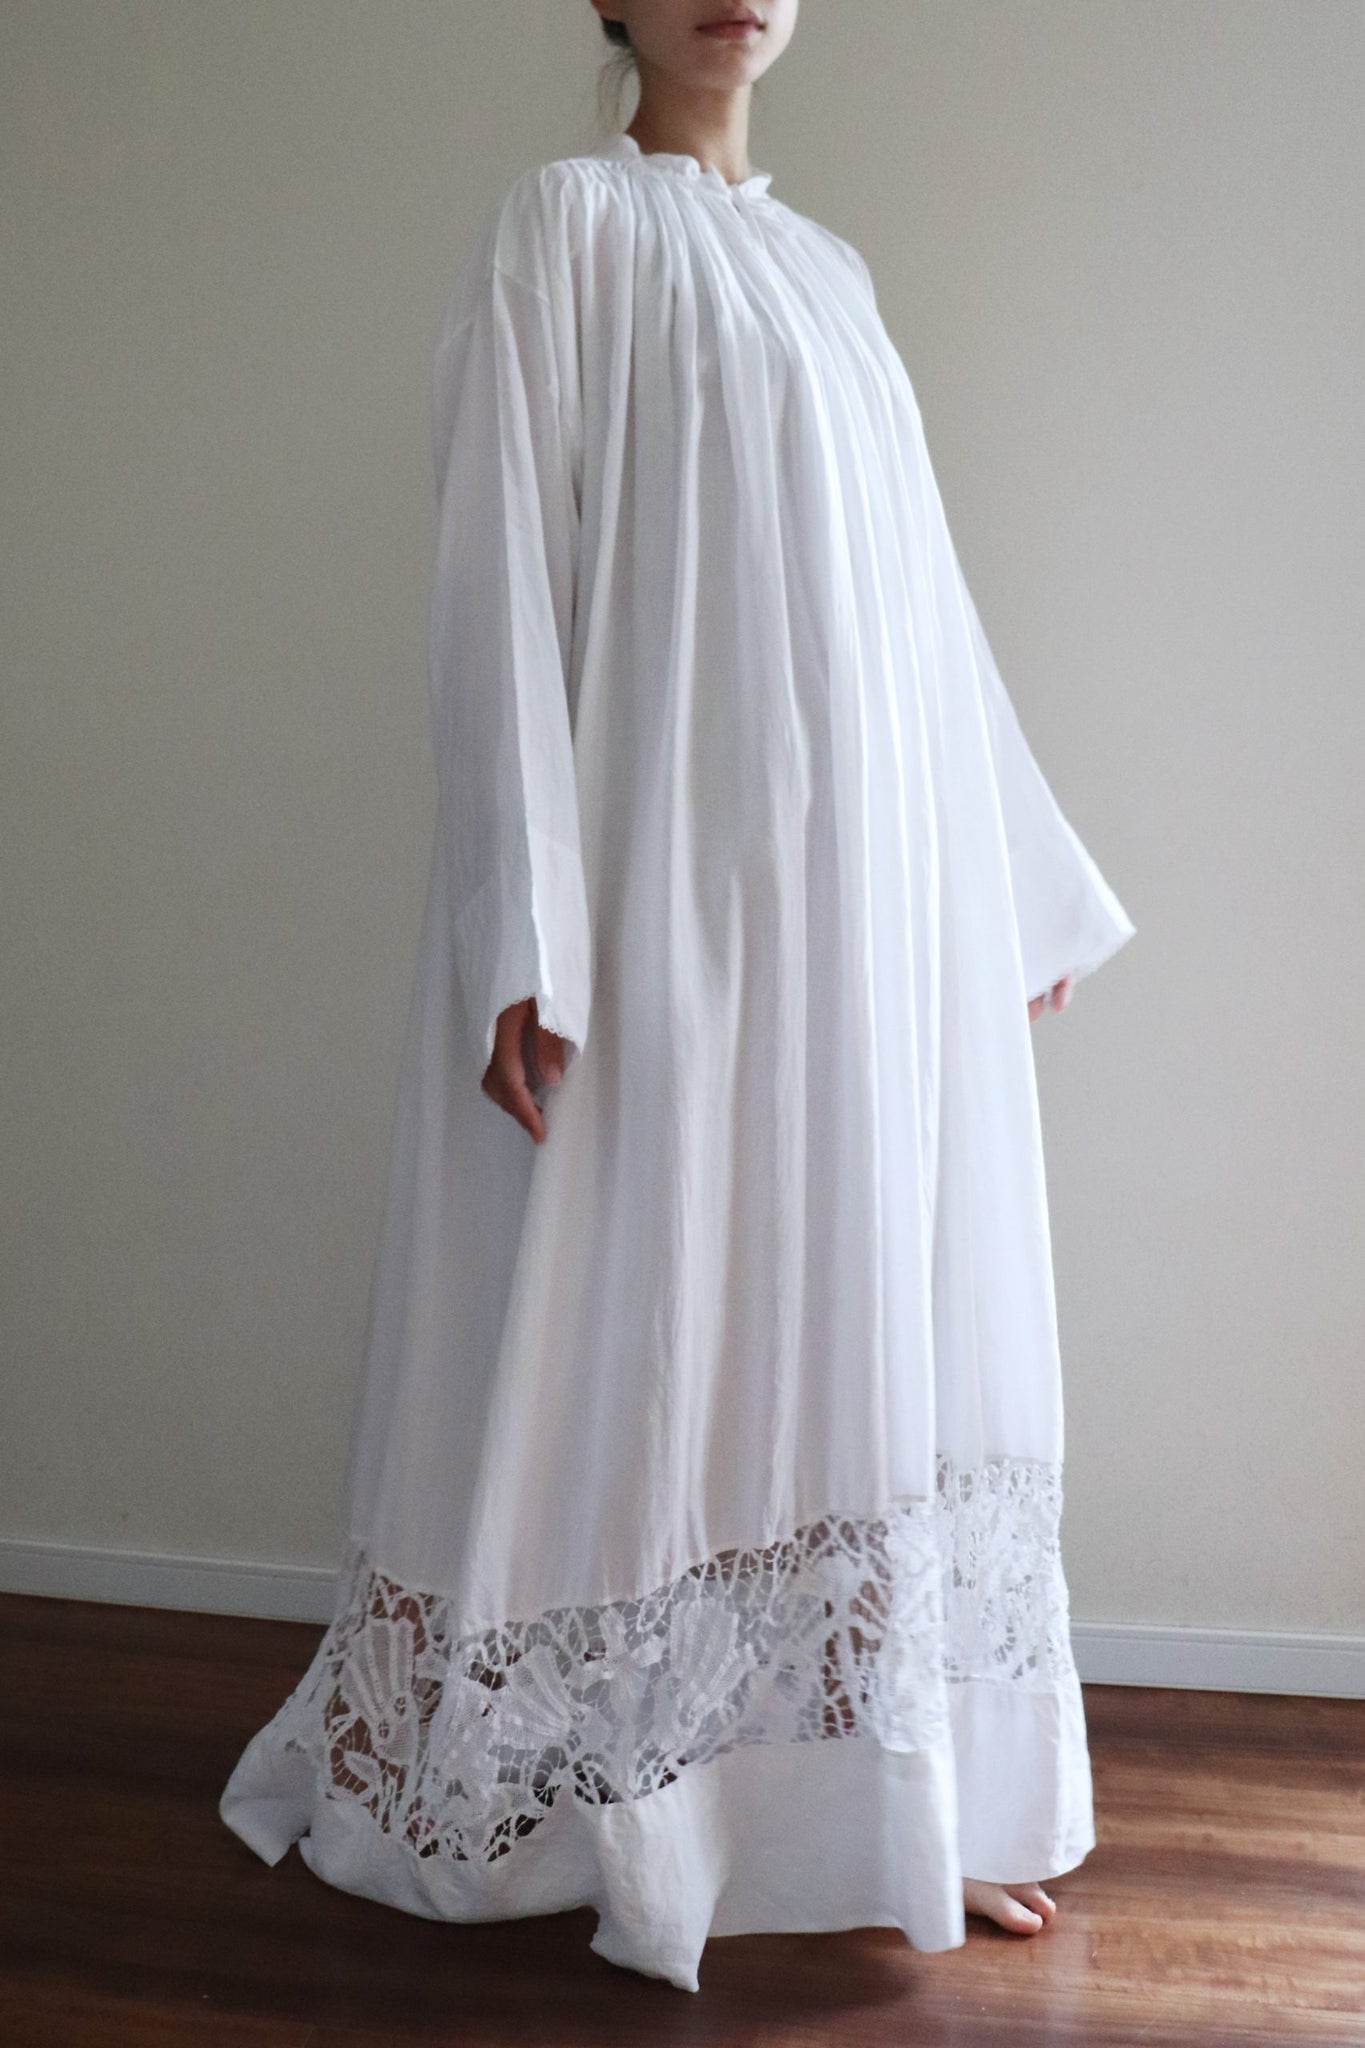 Antique Church Linen Smock Dress Hand Embroidery